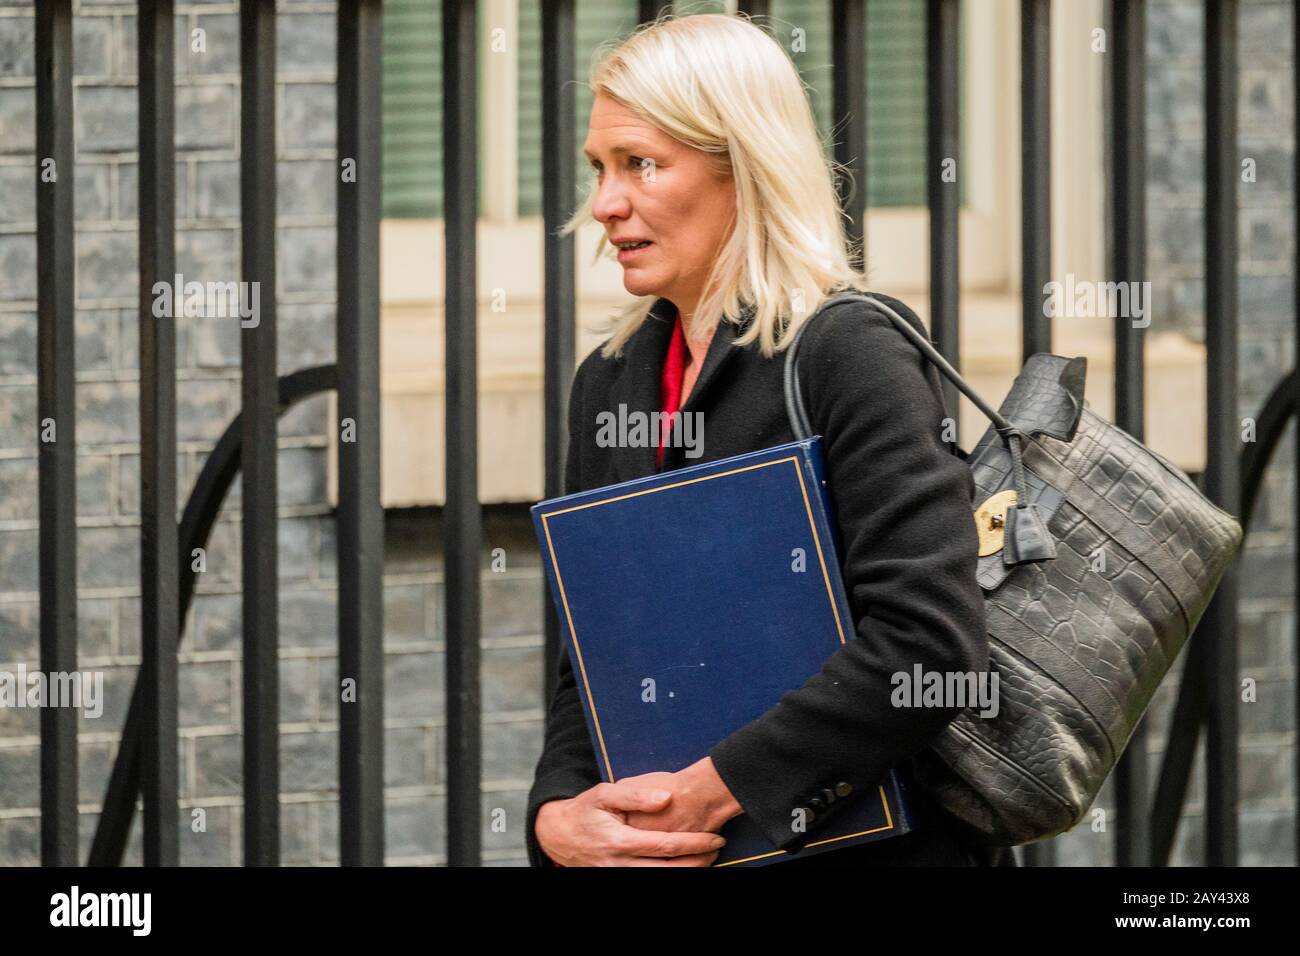 London, UK. 14th Feb, 2020. Amanda Milling MP has been appointed Minister without Portfolio, and a member of the Cabinet - Ministers arrive for the first Cabinet Meeting after the Boris Johnson's reshuffle, Downing Street. Credit: Guy Bell/Alamy Live News Stock Photo